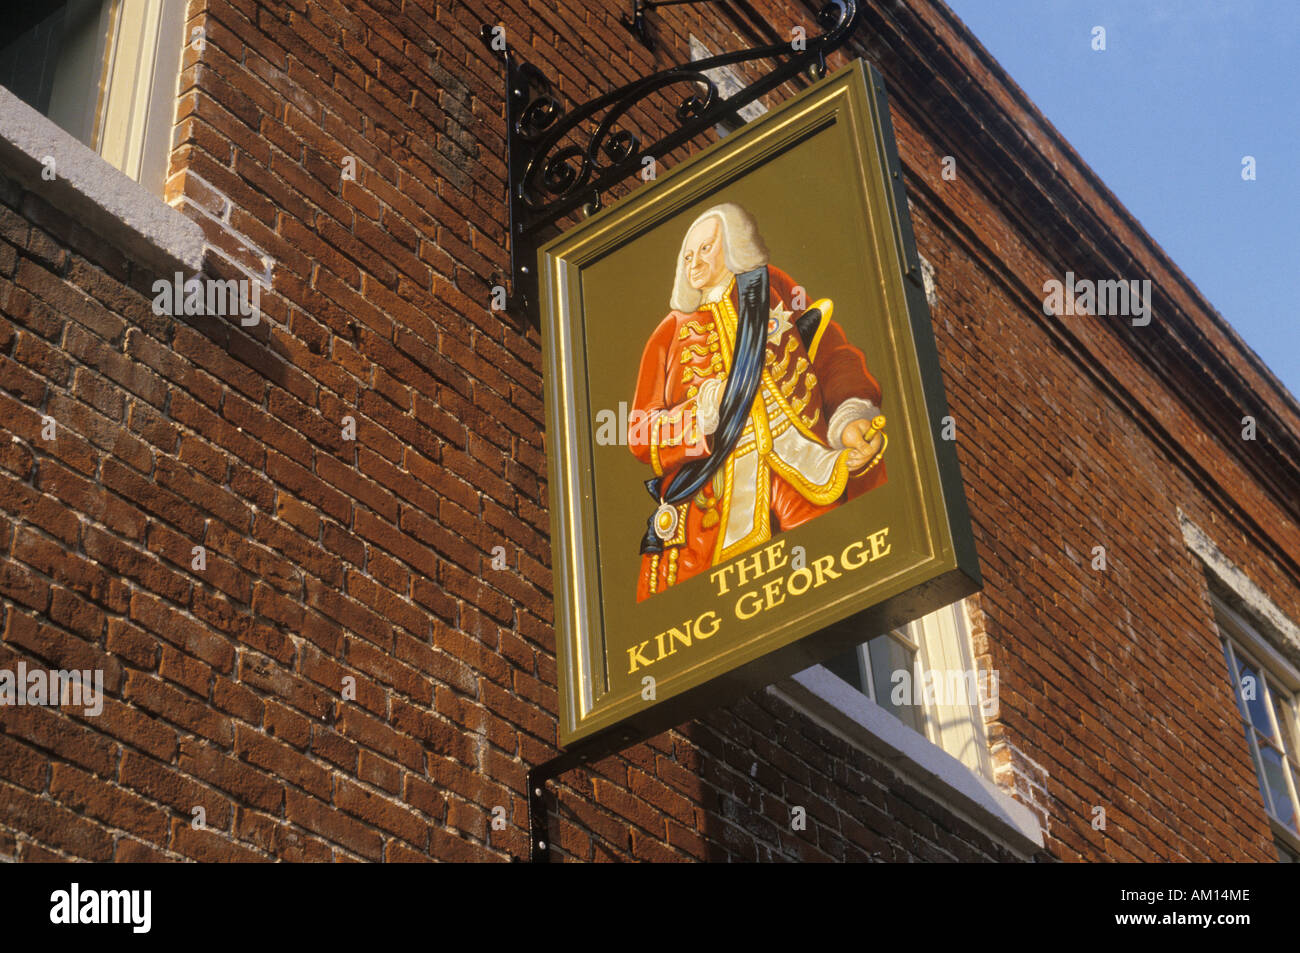 Exterior view and sign outside King George pub in historic Williamsburg Virginia Stock Photo